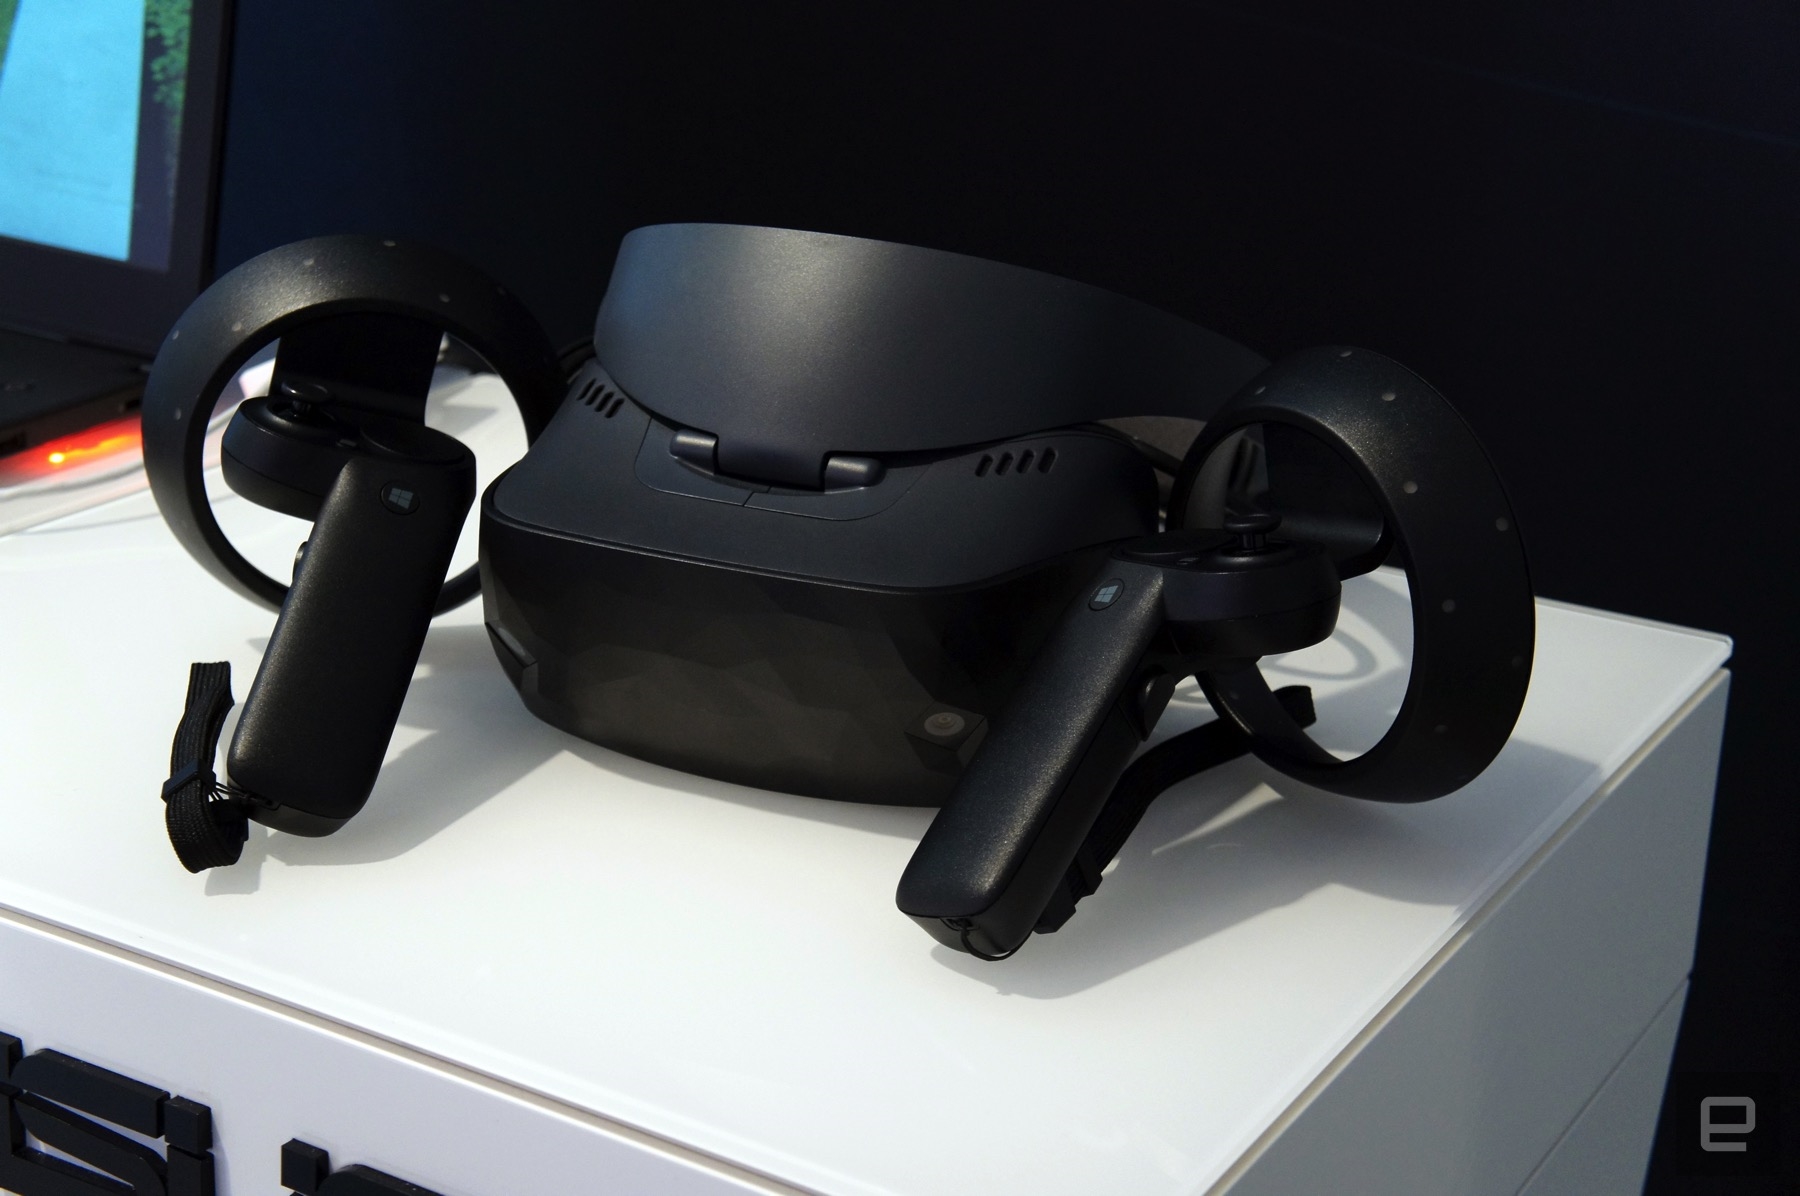 ASUS’ first mixed reality headset has plenty of pleasant surprises | DeviceDaily.com